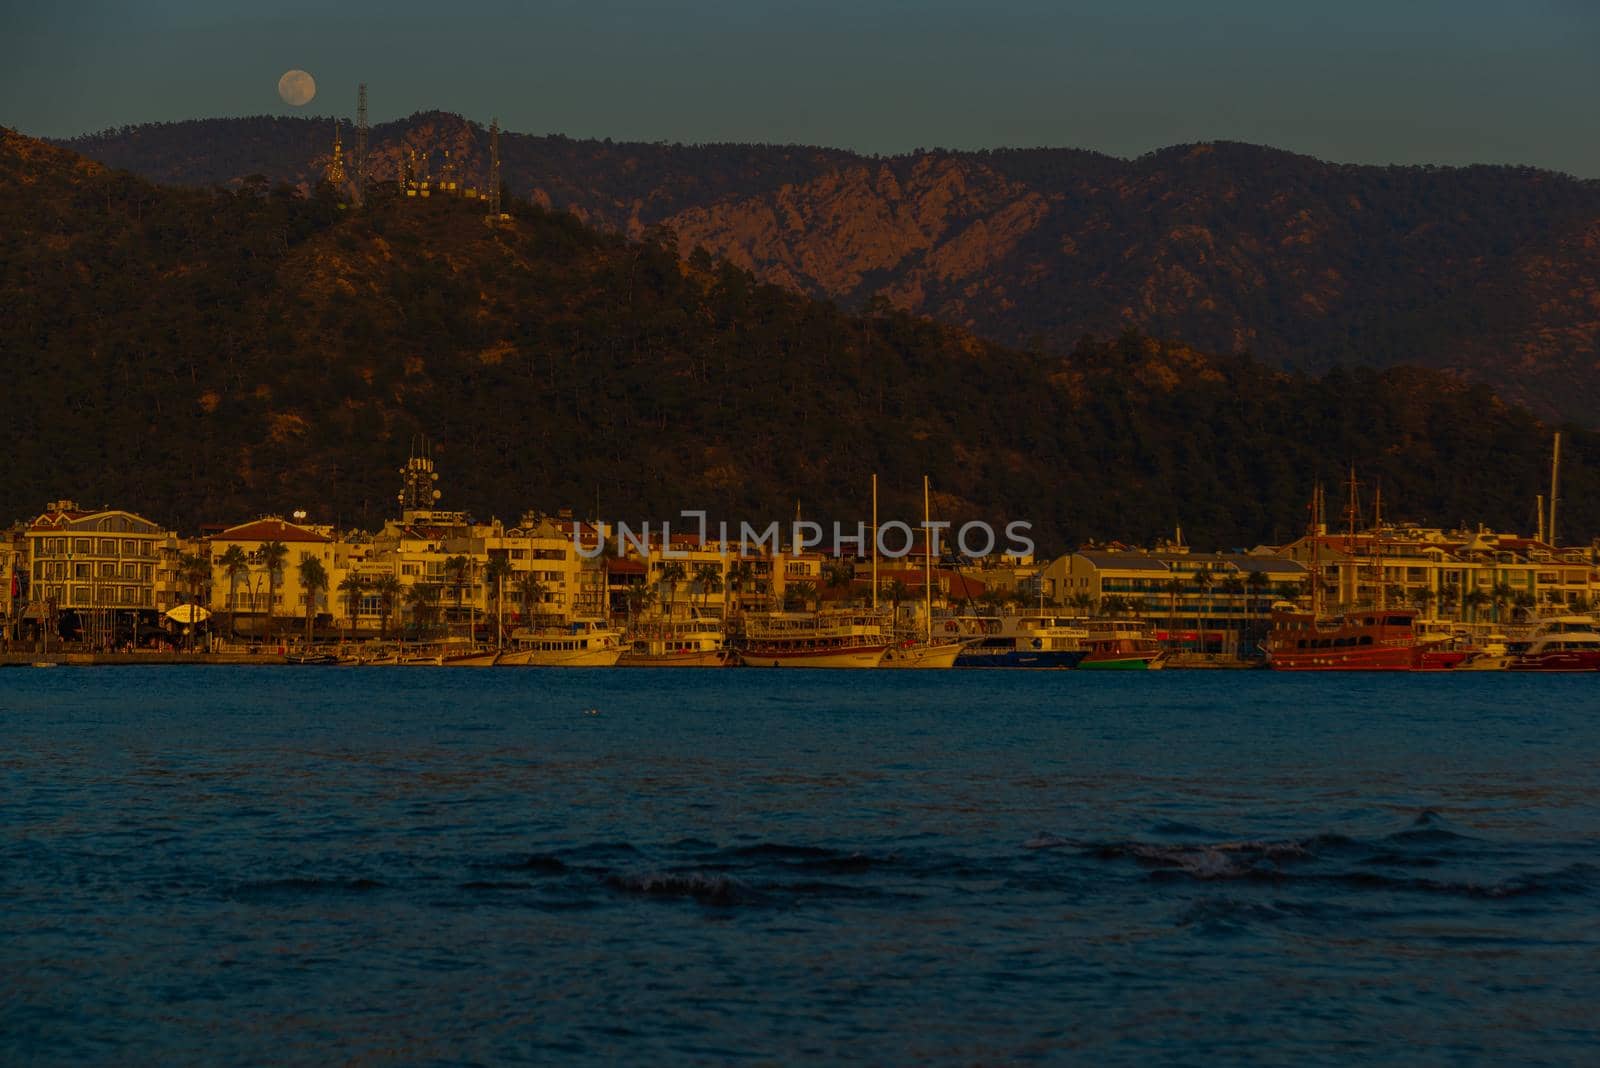 MARMARIS, MUGLA, TURKEY: Landscape with a view of the old town, Fortress and ships in Marmaris at sunset.